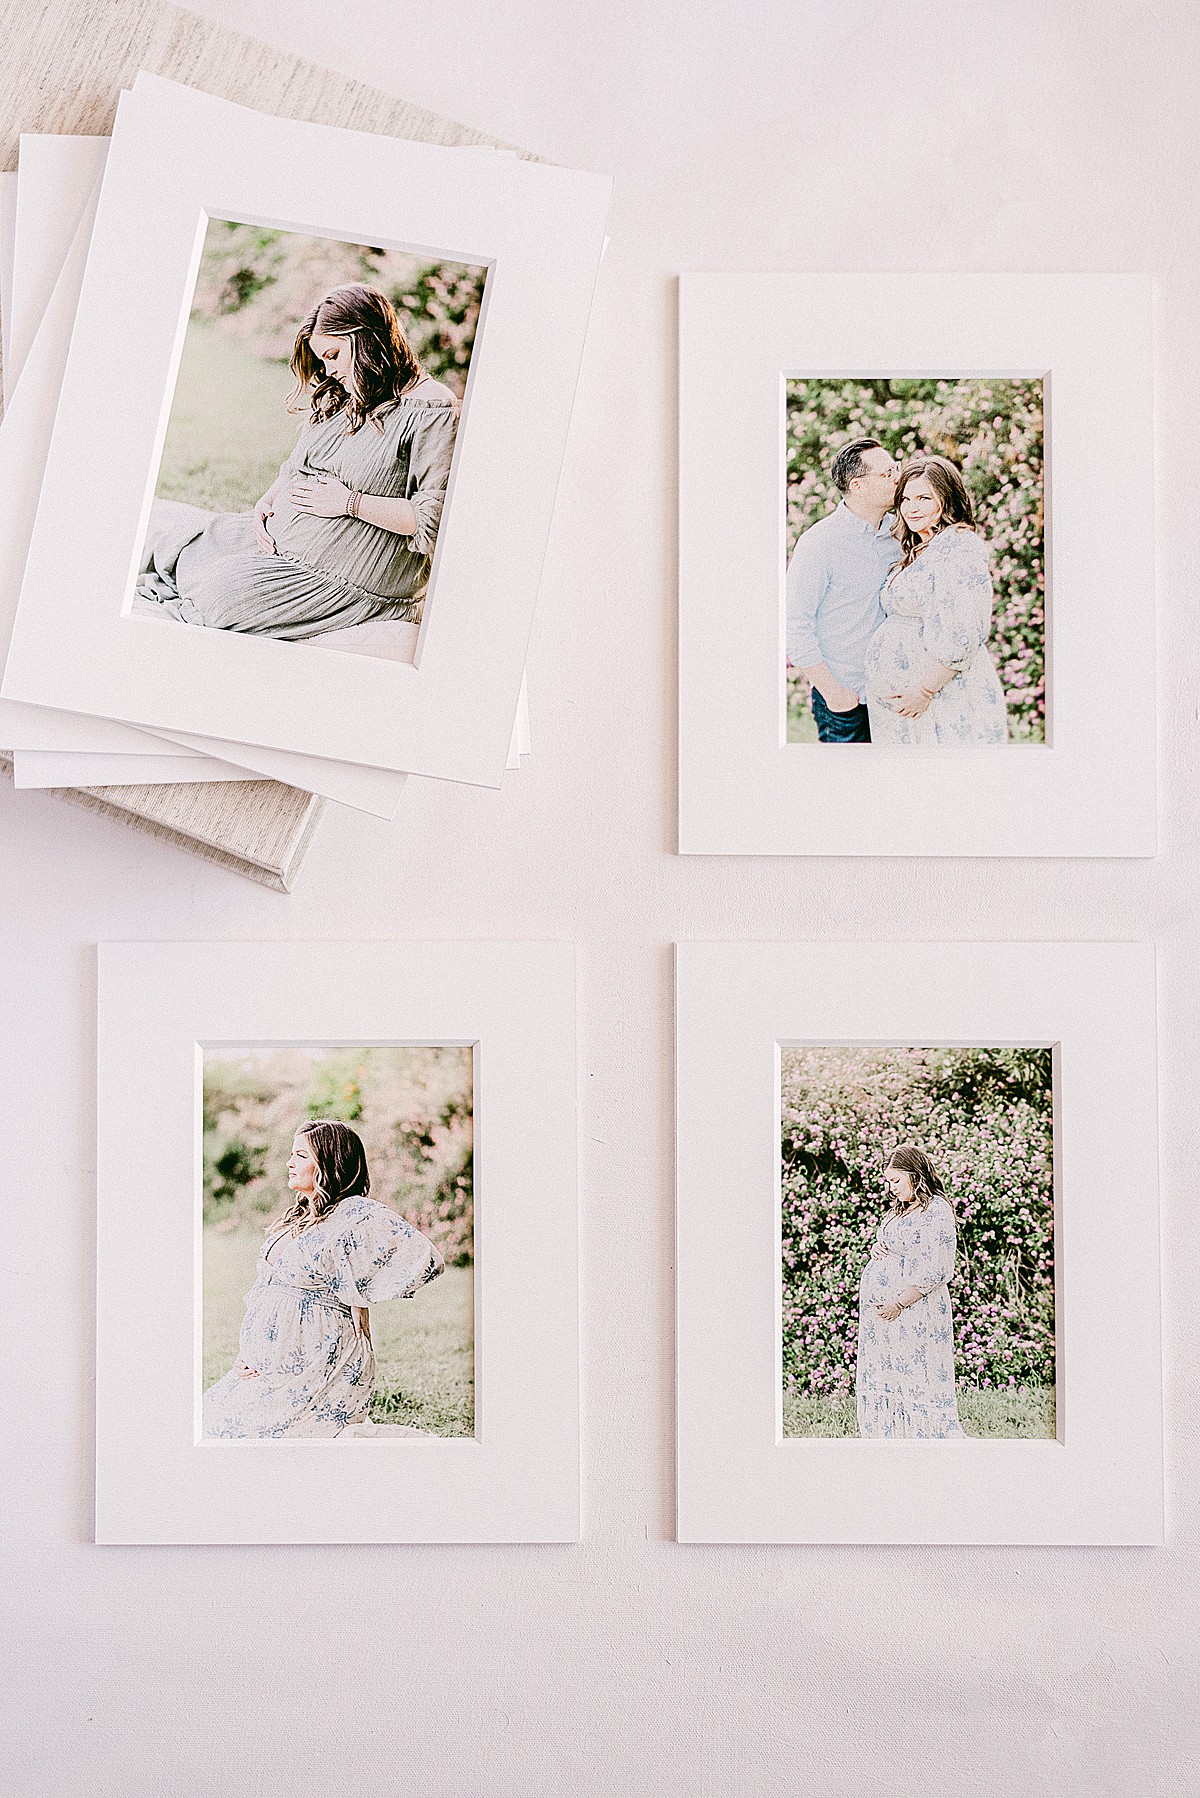 compilation of matted prints of maternity photoshoot for gallery wall design by scottsdale az photographer